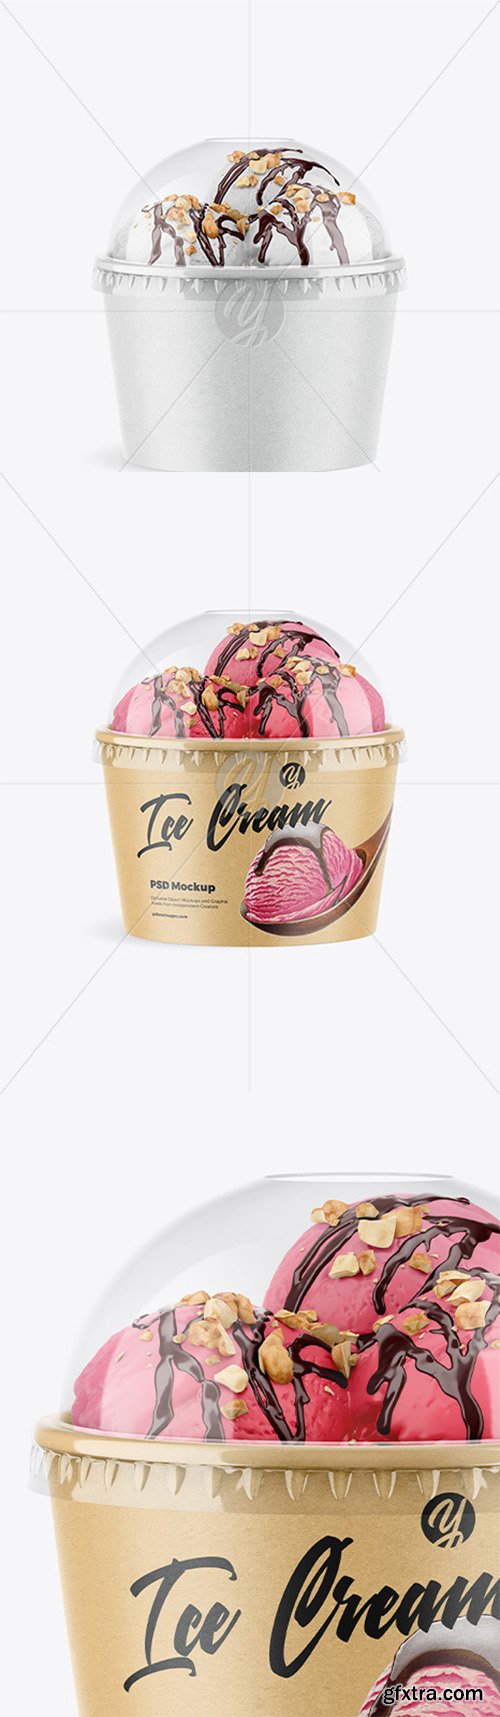 Kraft Ice Cream Cup with Plastic Cap Mockup - Front View 60414